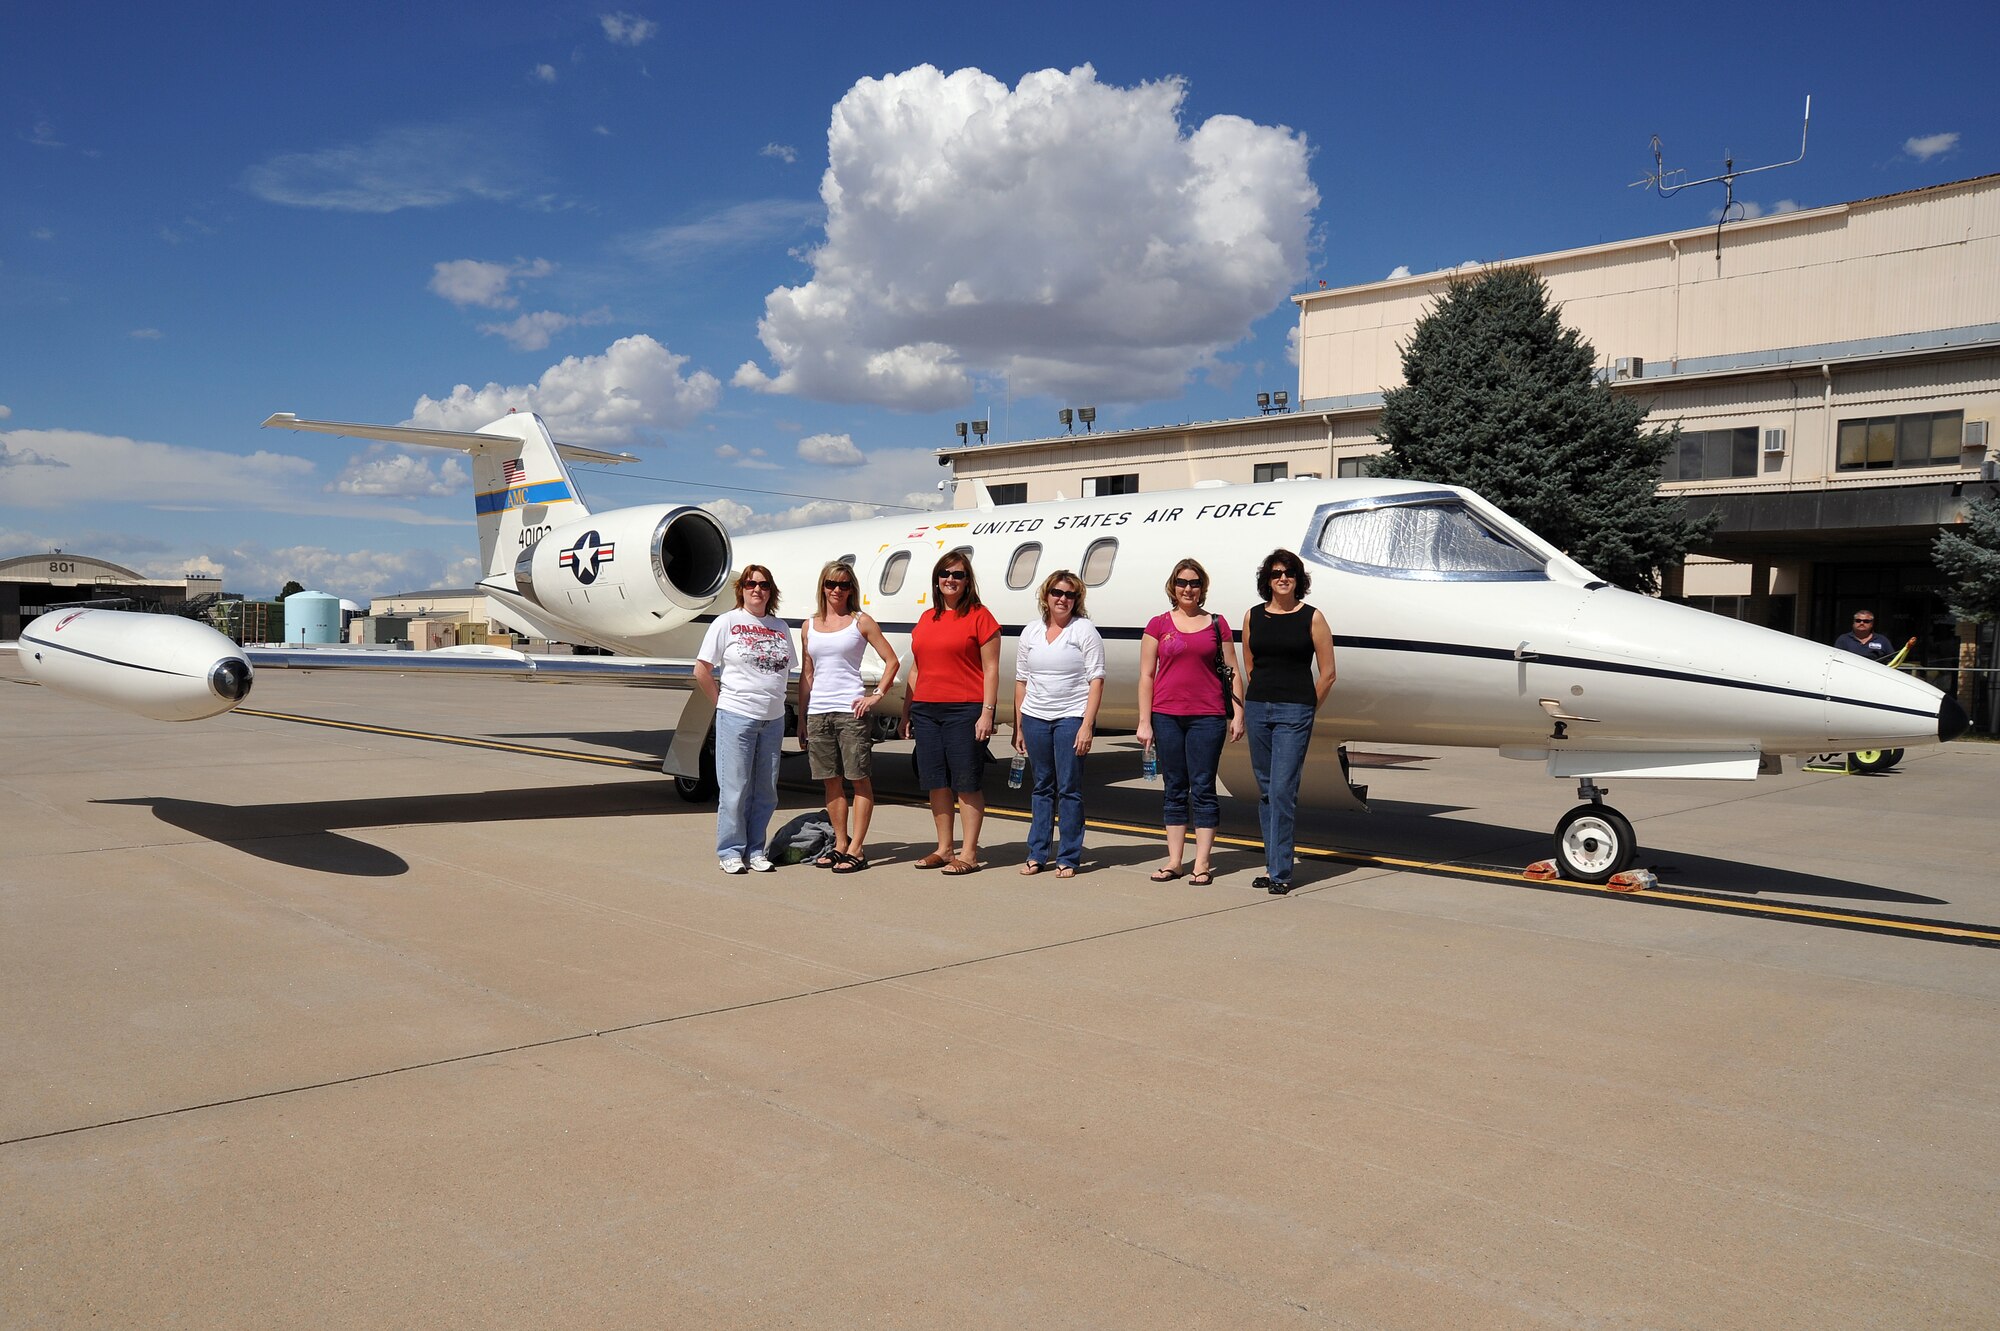 Left to right, Paula Tootle, Denise Meika , Anna Morgan, Melisa Danielson, Rebecca Stumpf and Liz Rohrer pose with a C-21 flown by the 200th Airlift Squadron out of Buckley Air Force Base, September 20, 2009.  The Colorado Air National Guard is honoring its spouses this week in appreciation of all their support by giving them incentive flights in a C-21 over the state of Colorado. (U.S. Air Force photo by Tech. Sgt. Wolfram M. Stumpf, Colorado Air National Guard/Released) 